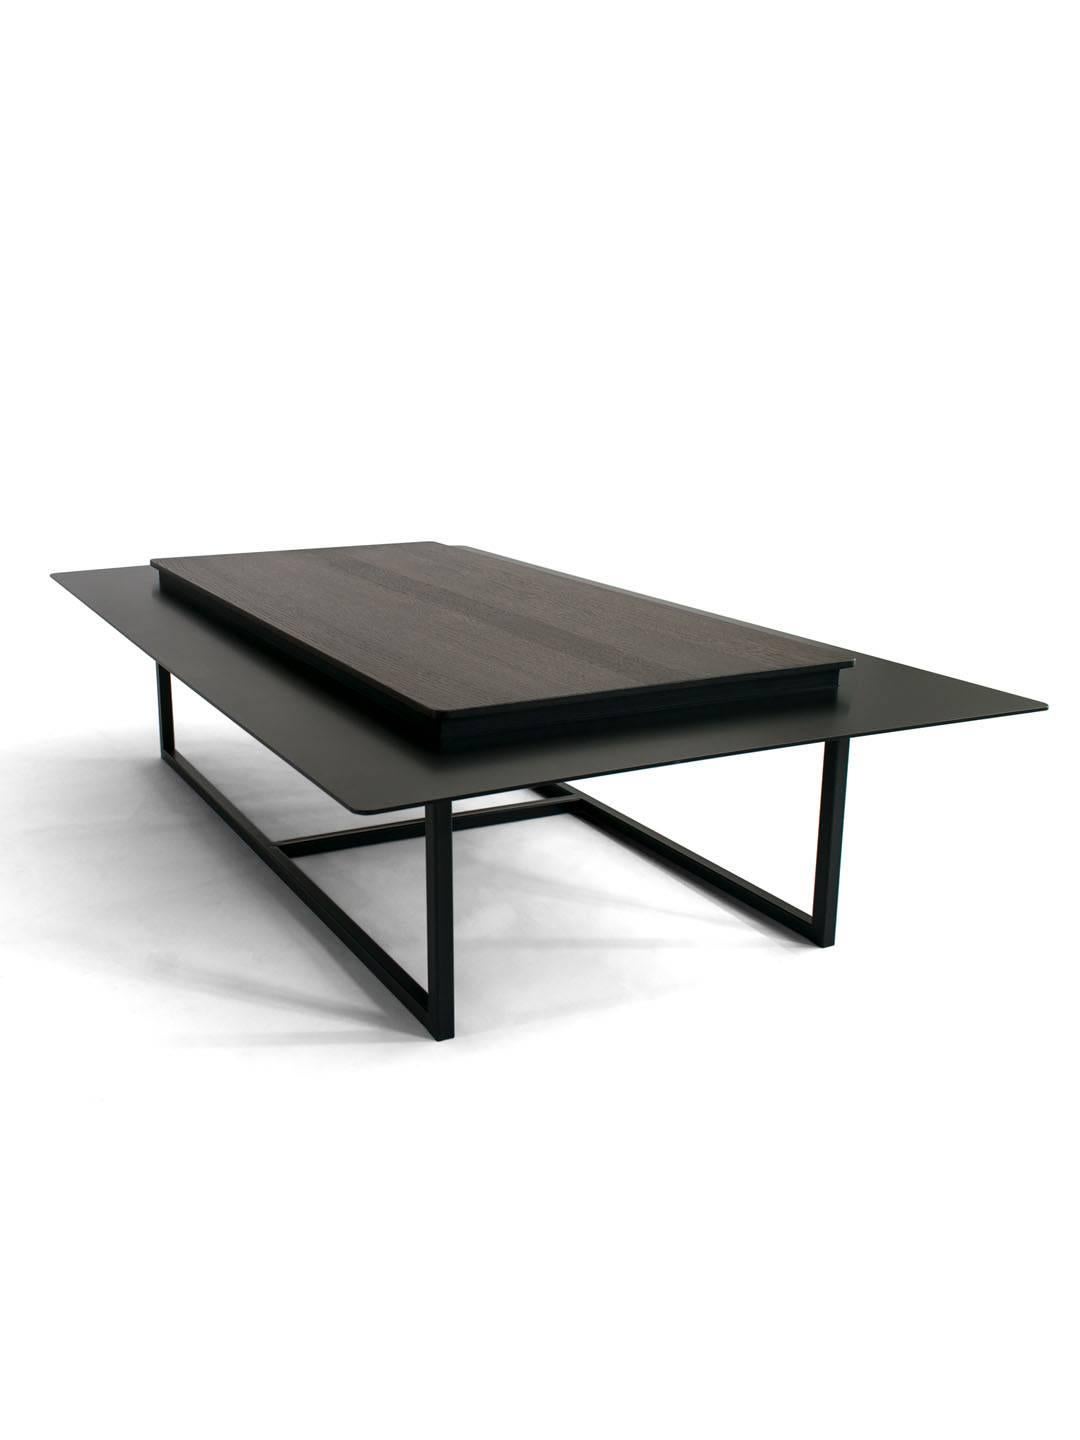 Tungen coffee table, Jan Garncarek
Materials: Steel, wood.
Dimensions: 33 x 130 x 80 cm.
Weight: 60 kg

The table consists of a wood top with a metal collar. This will enable the separation of everyday objects from those, that we want to expose